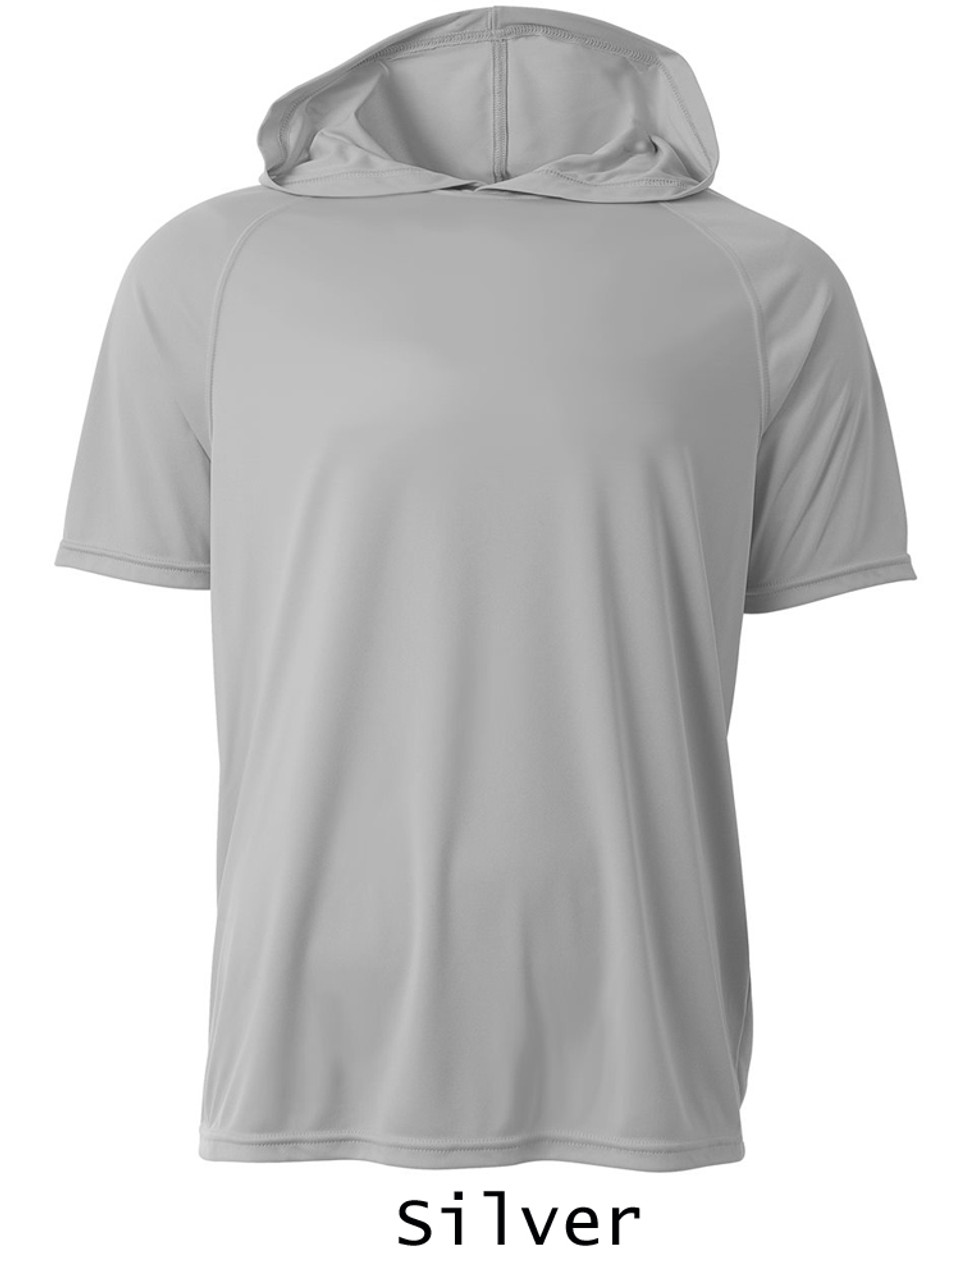 Light Weight Hooded Shooting Shirt (Name and number on the back